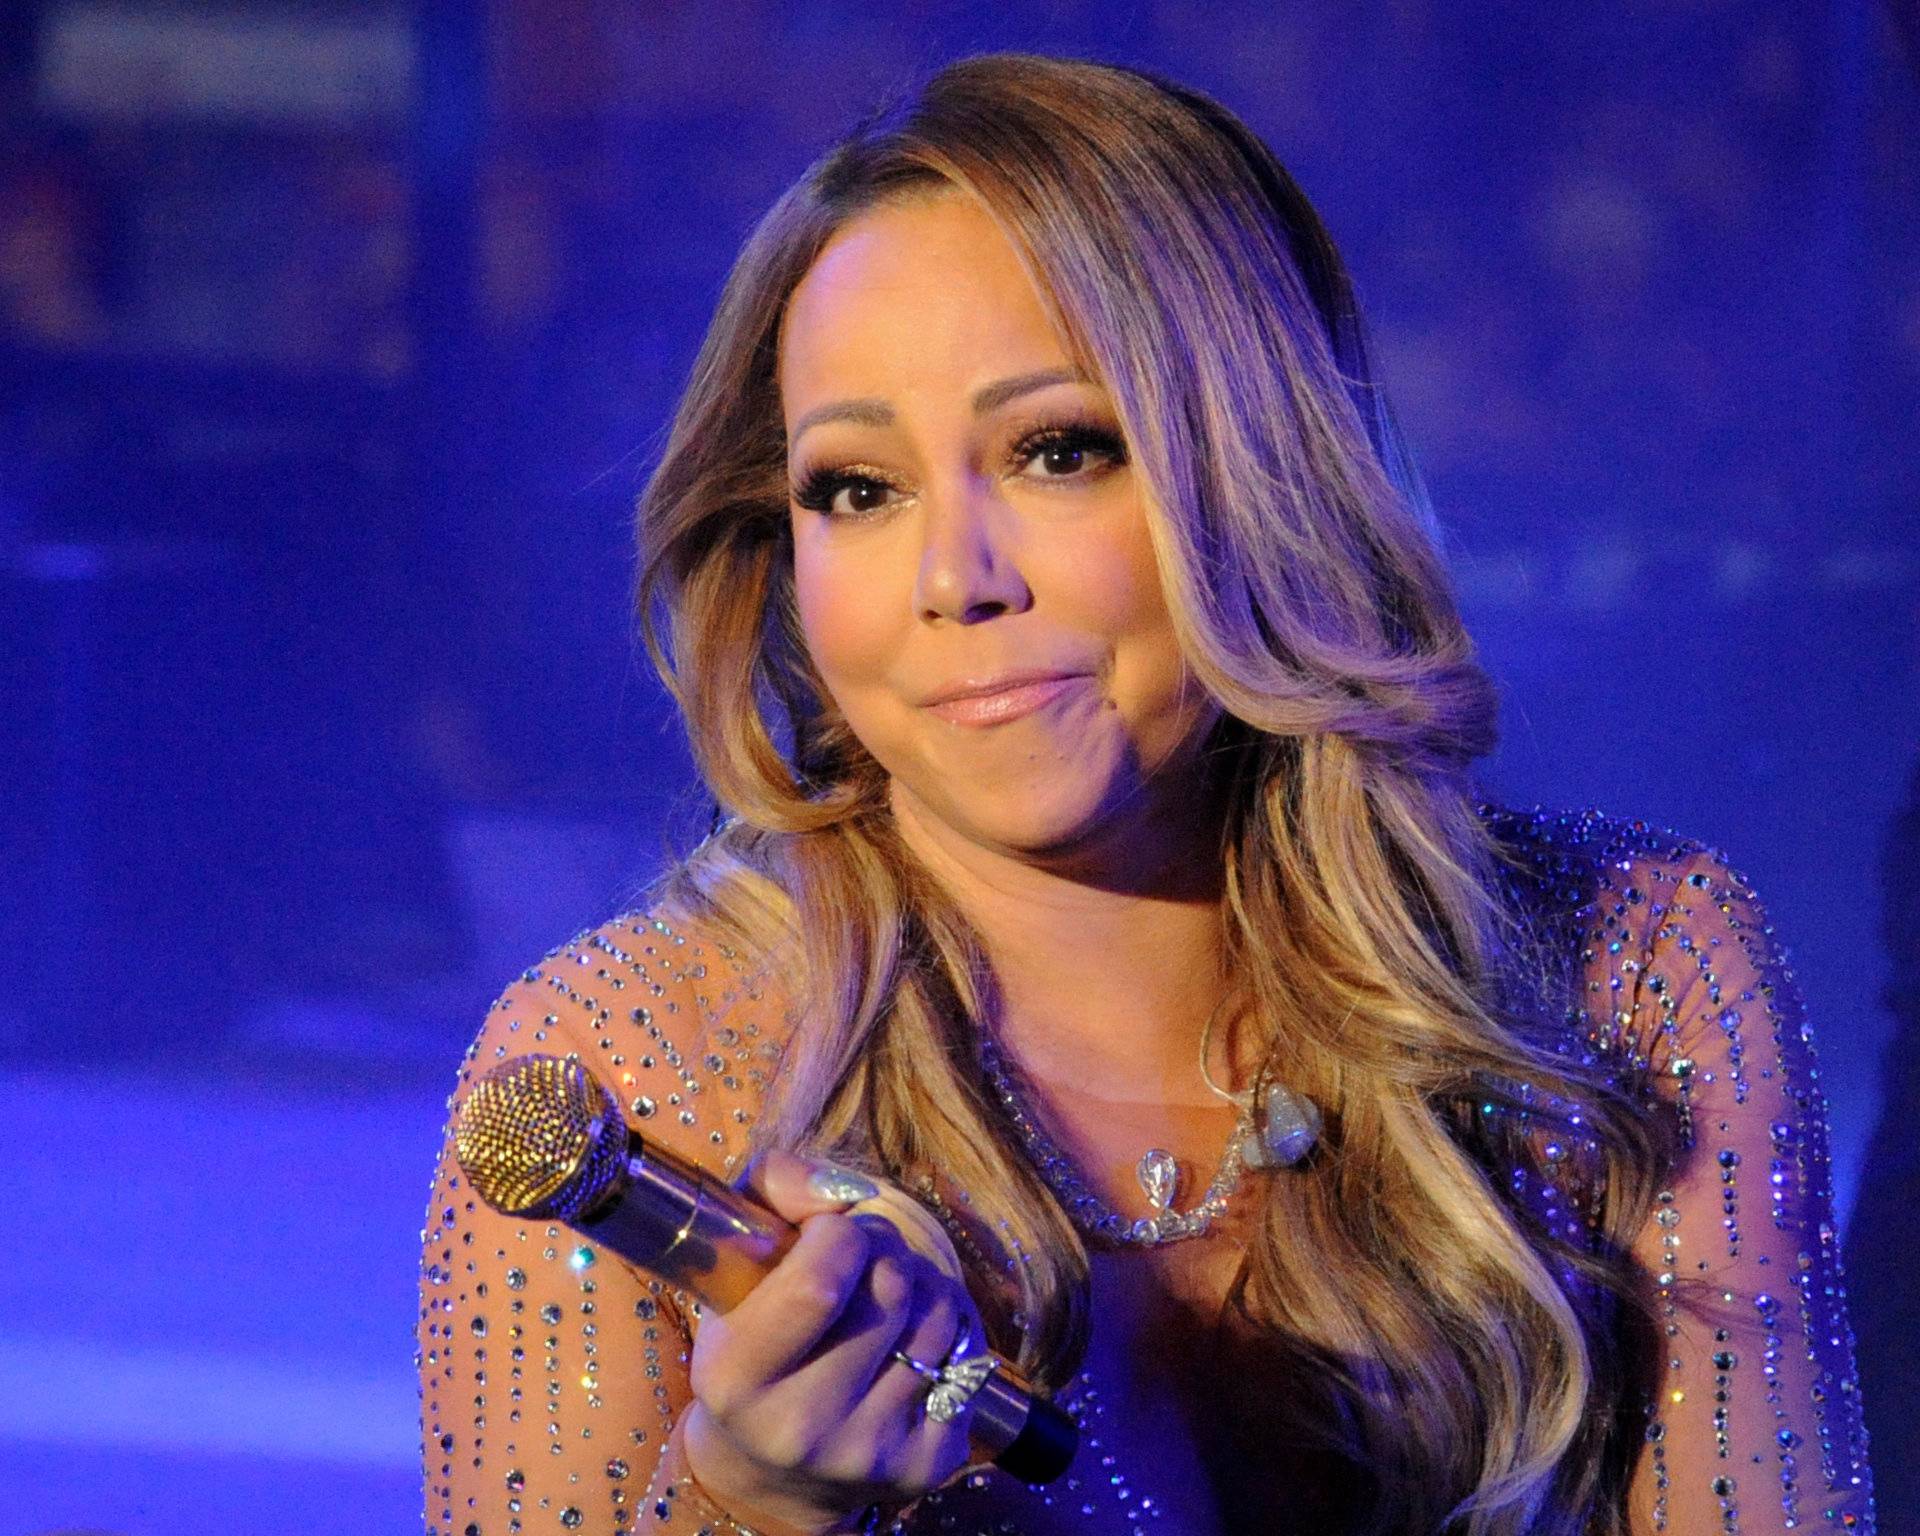 Mariah Carey performs during a concert in Times Square on New Year's Eve in New York